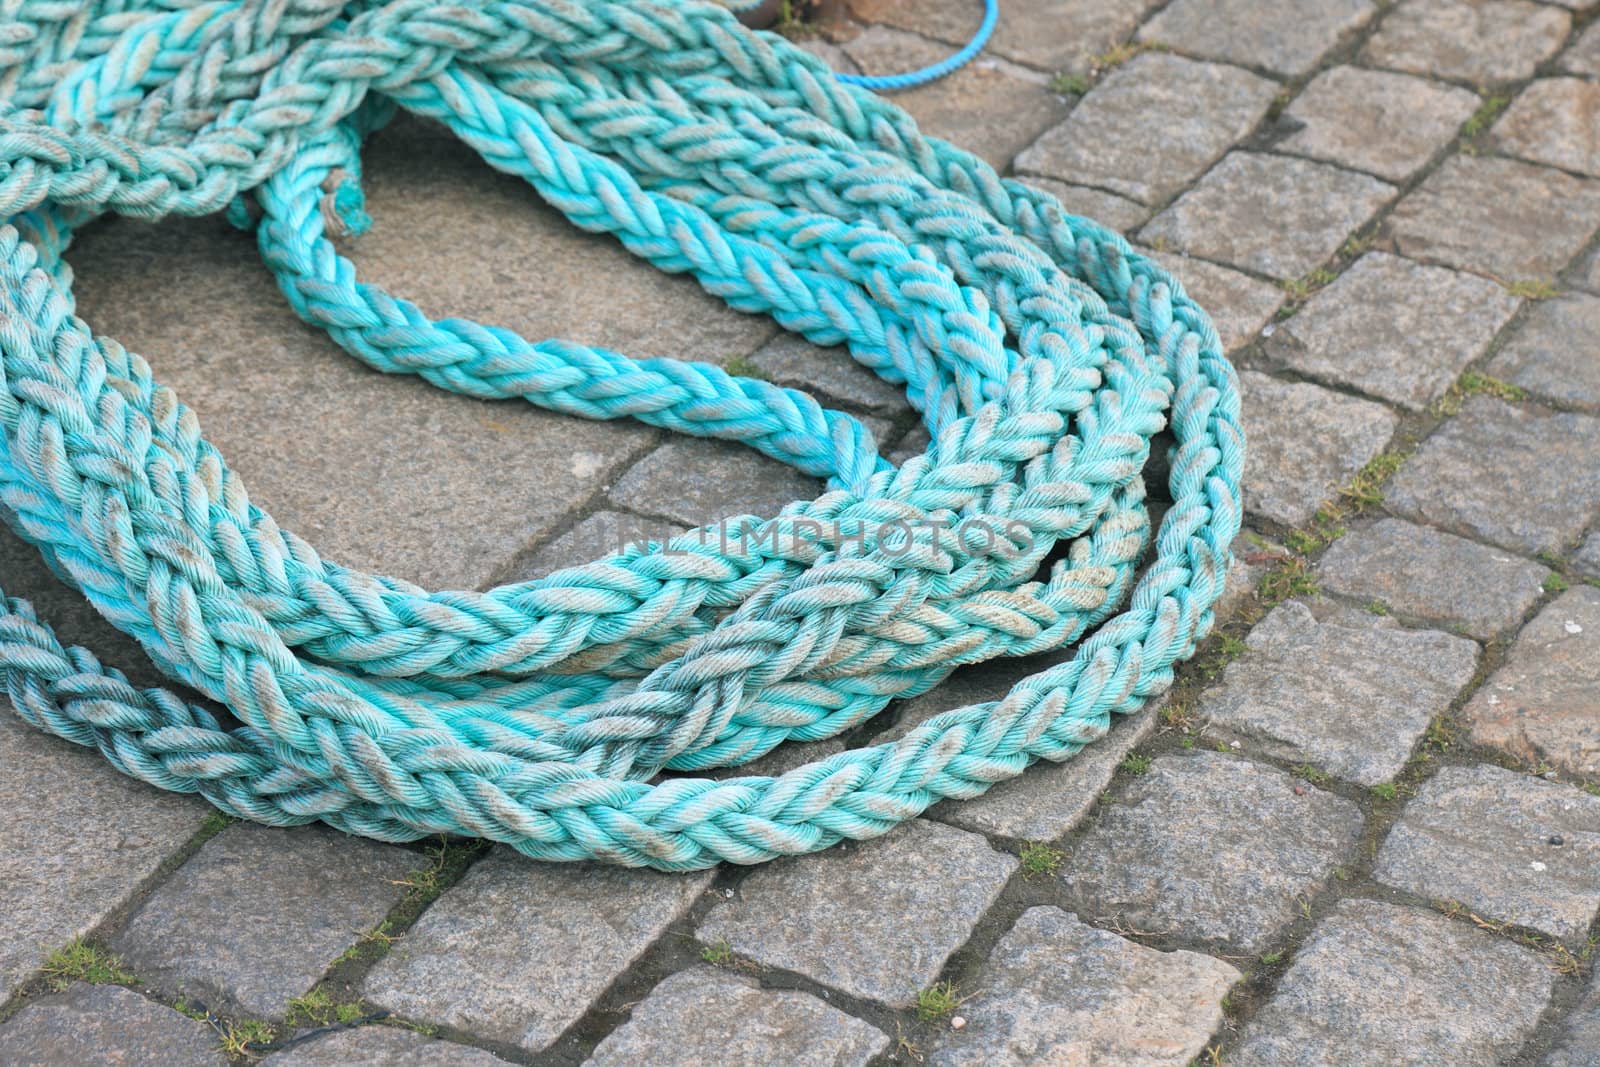 Blue twisted rope on pavement.